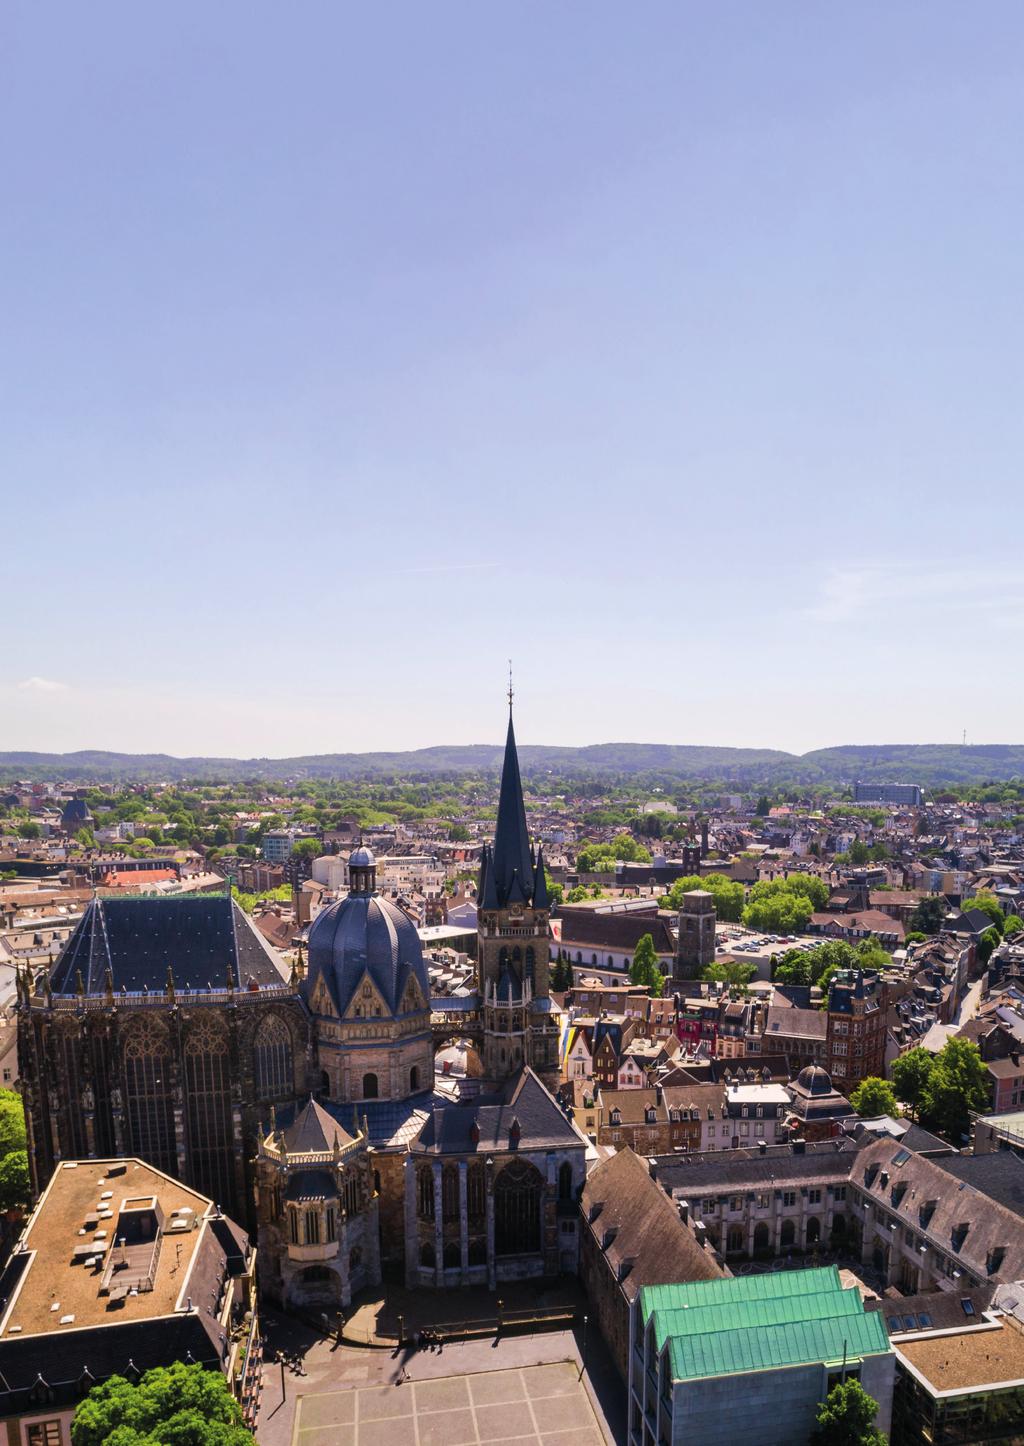 10 reasons you should visit North Rhine-Westphalia in 2019 can explore 1lairYou Charlemagne s in Aachen Aachen the westernmost city of North Rhine-Westphalia is one of the most historically important